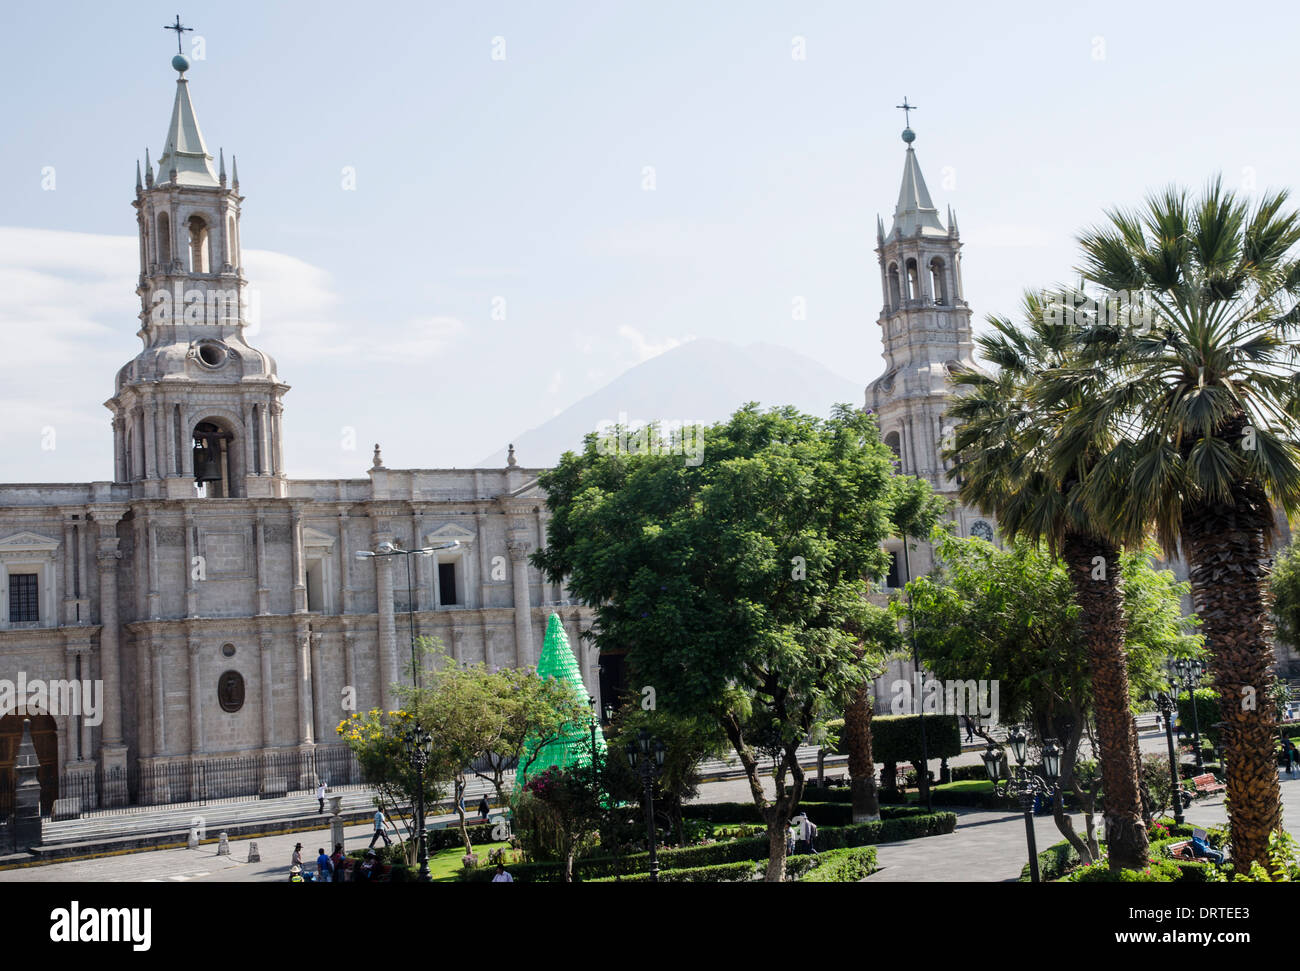 Plaza de Armas of Arequipa city and the Cathedral1844.Arequipa. Peru. UNESCO World Heritage Site. Stock Photo